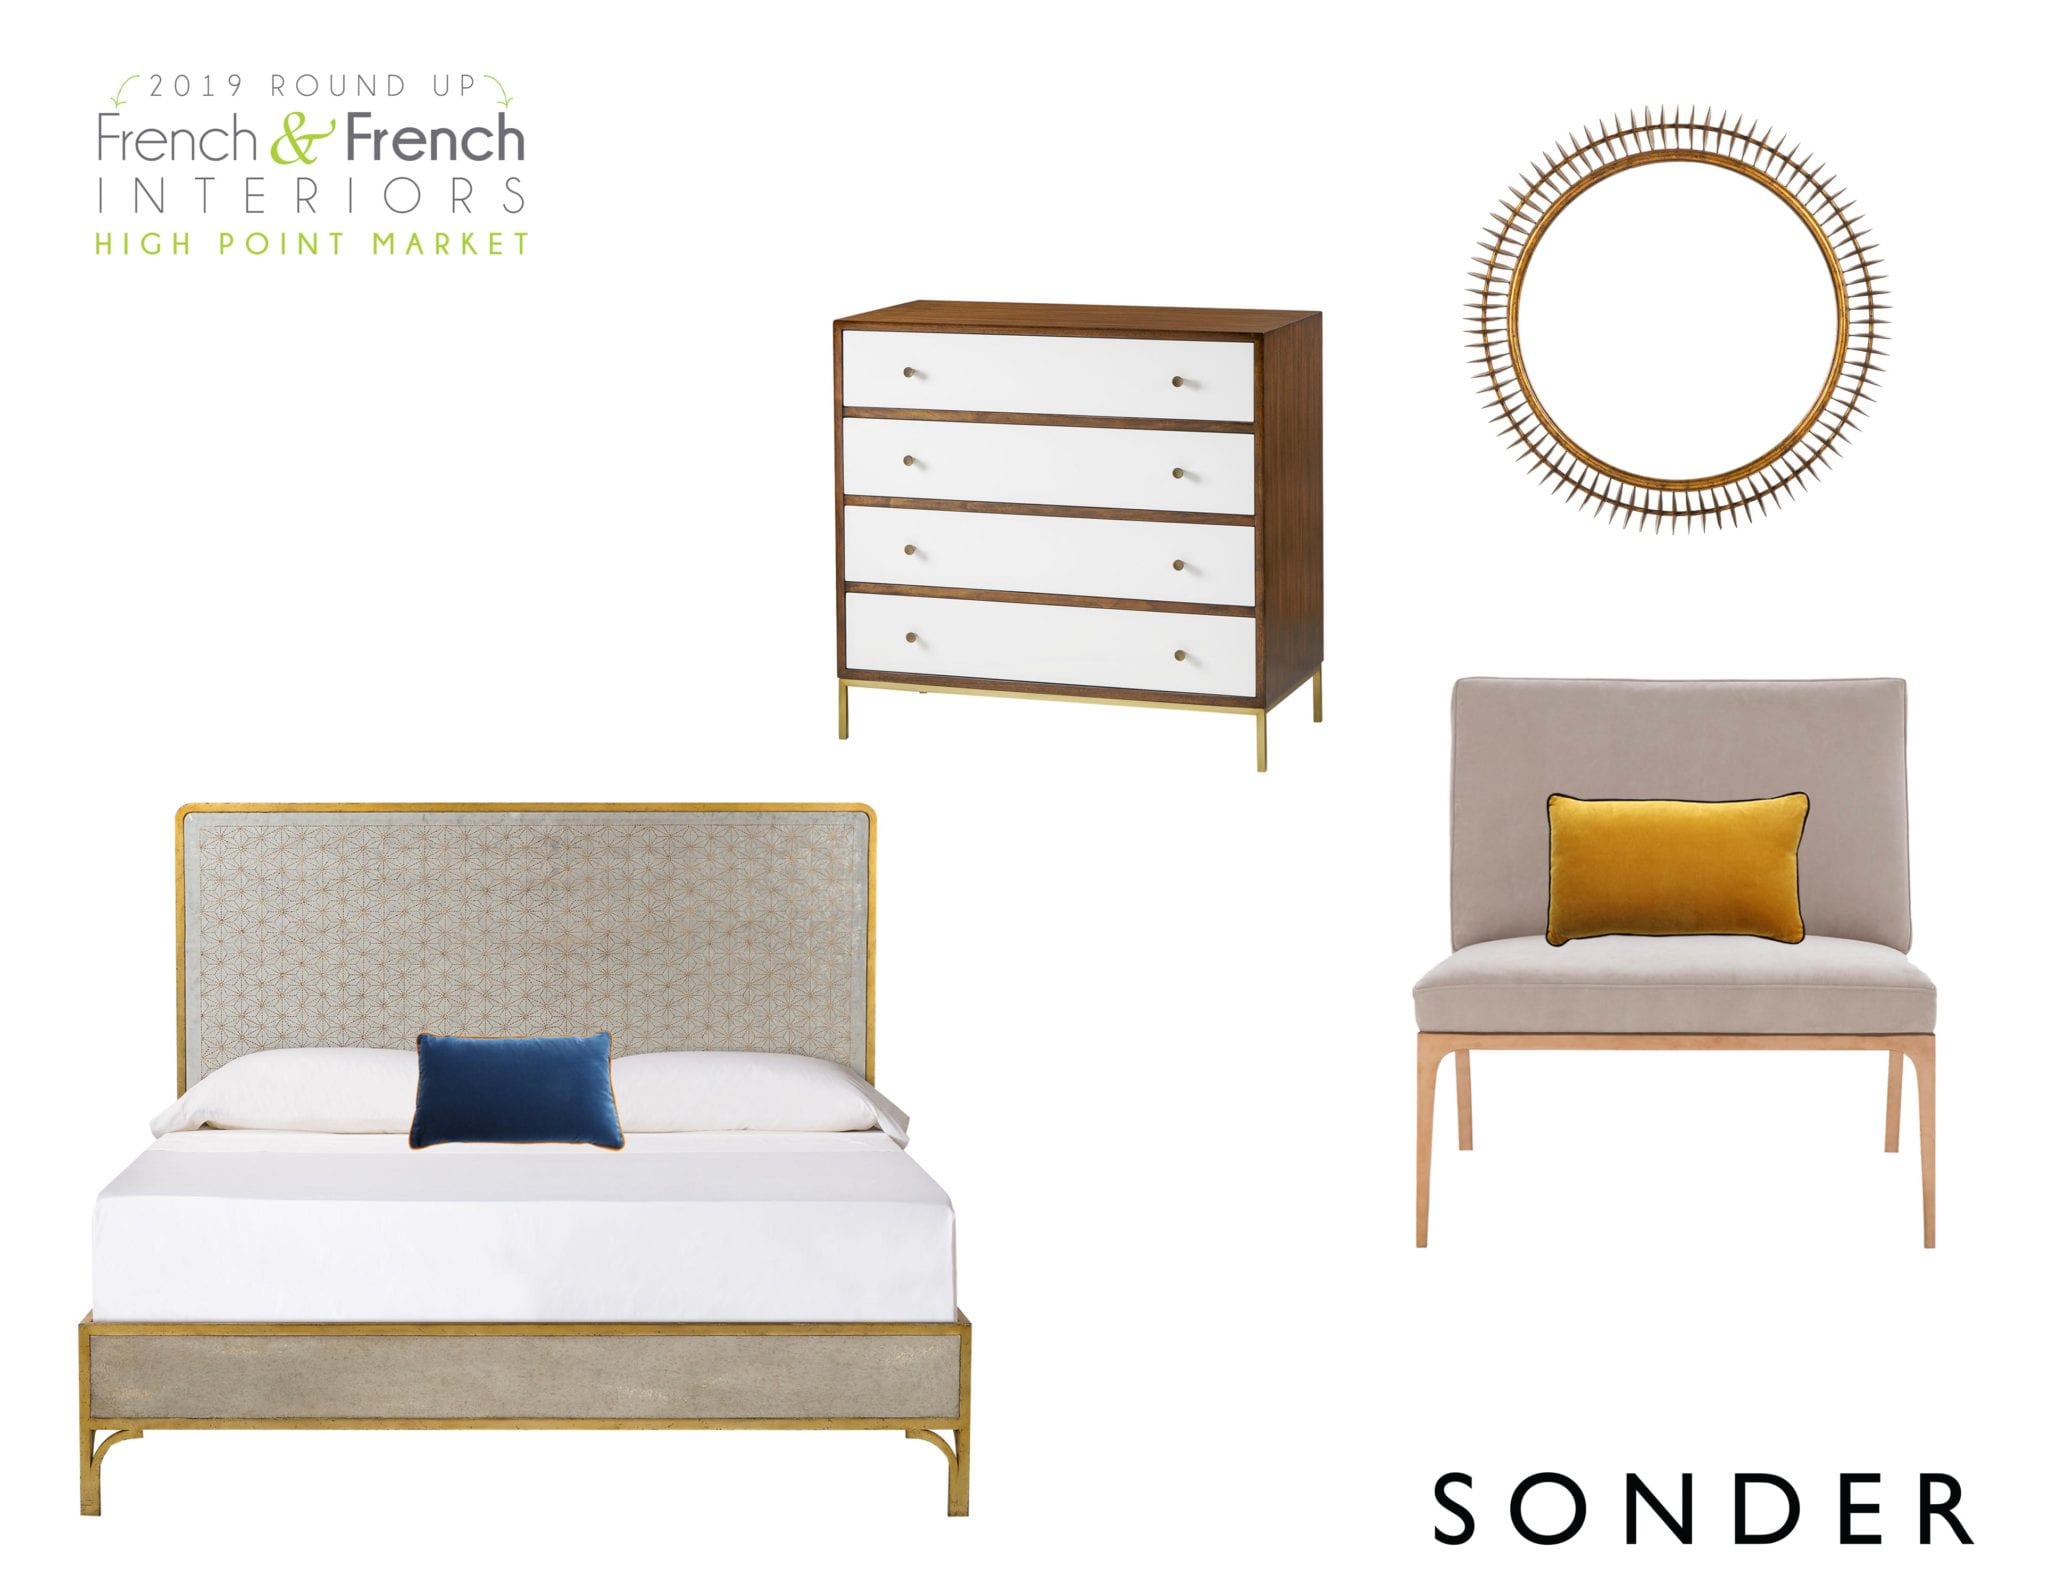 graphic for 2019 Round up from French & French Interiors High Point Market with different furniture items from Sonder